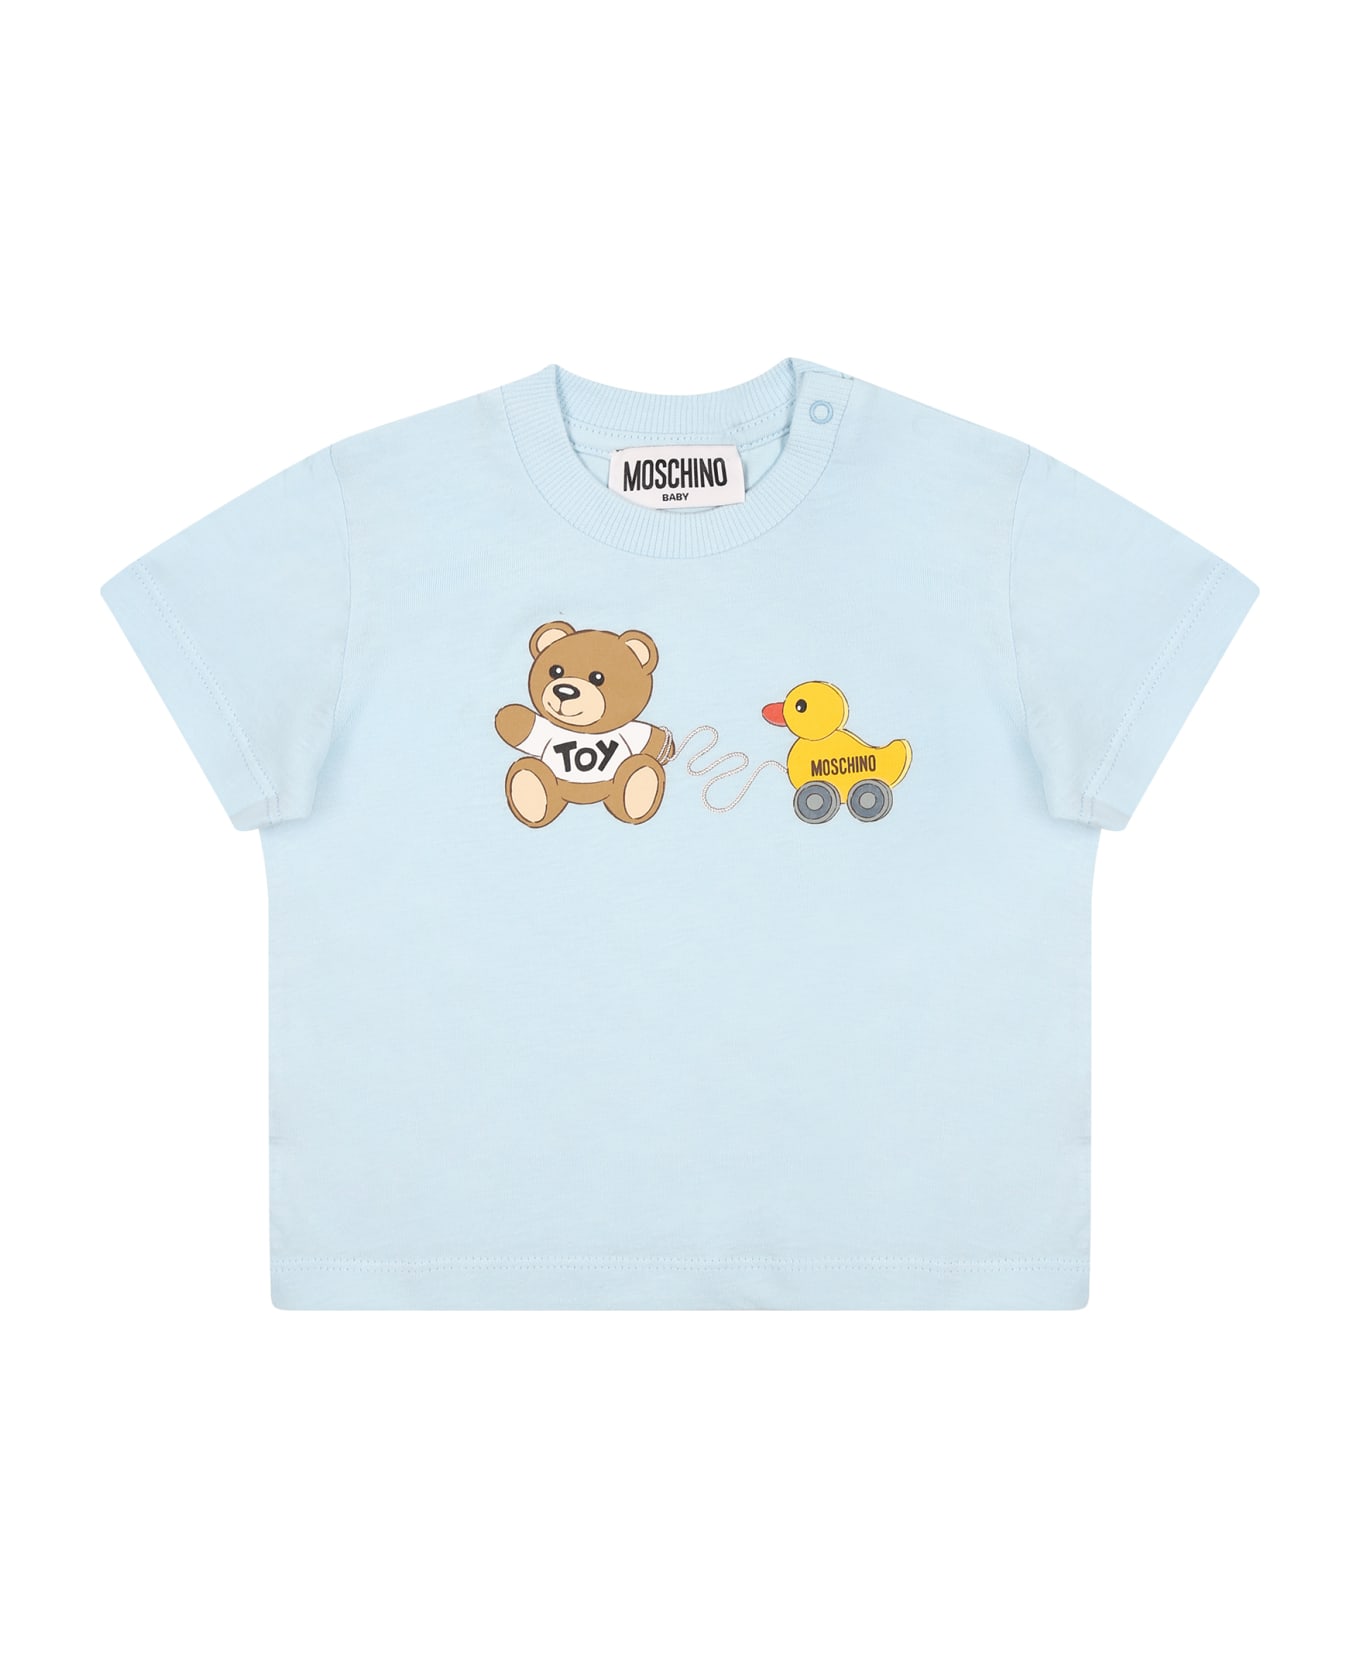 Moschino Light Blue T-shirt For Baby Boy With Teddy Bear And Duck - Light Blue